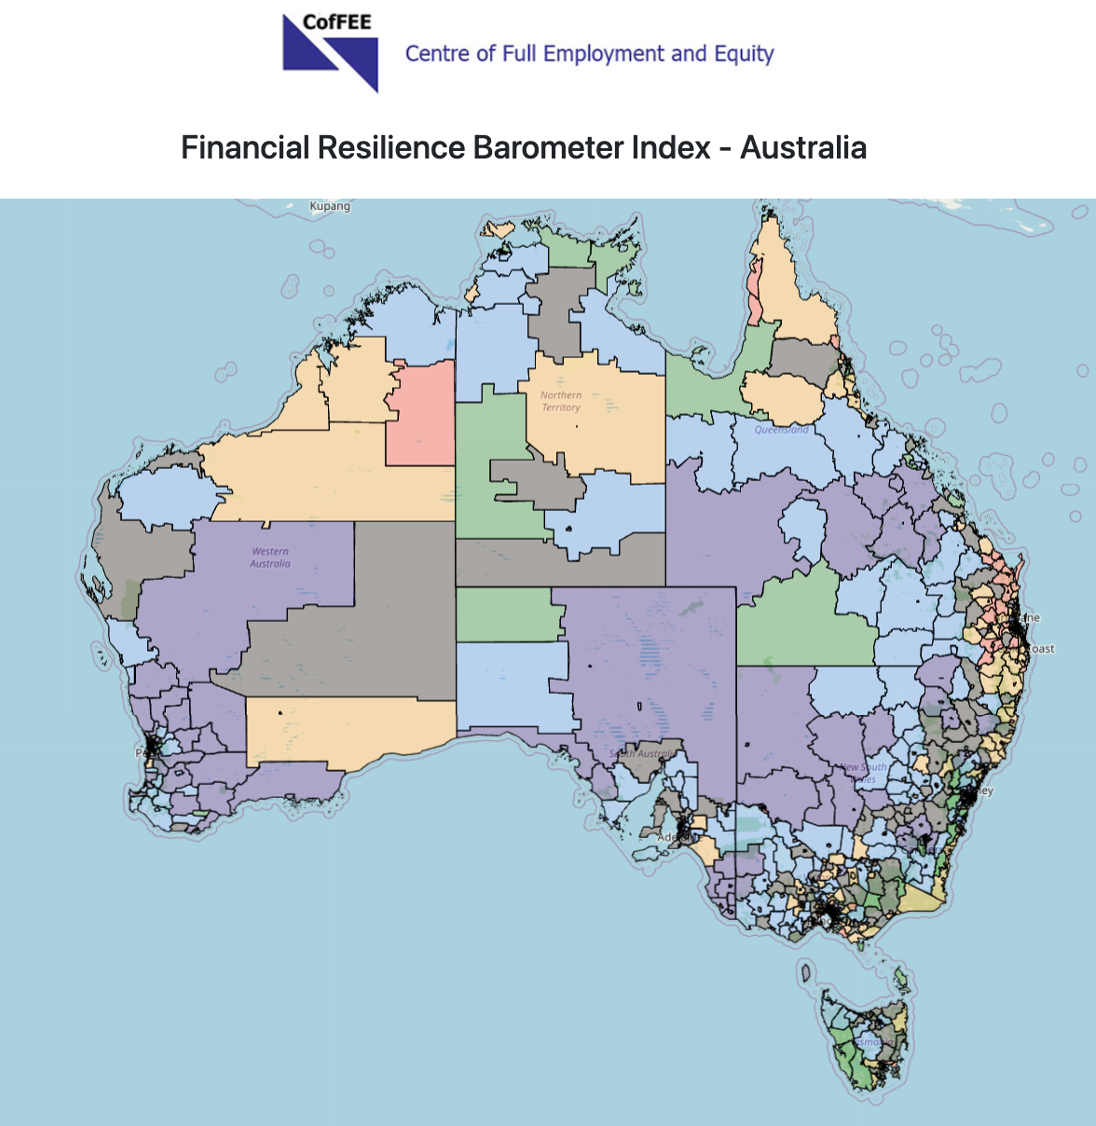 A colour coded map of Australia that shows levels of Financial Resilience